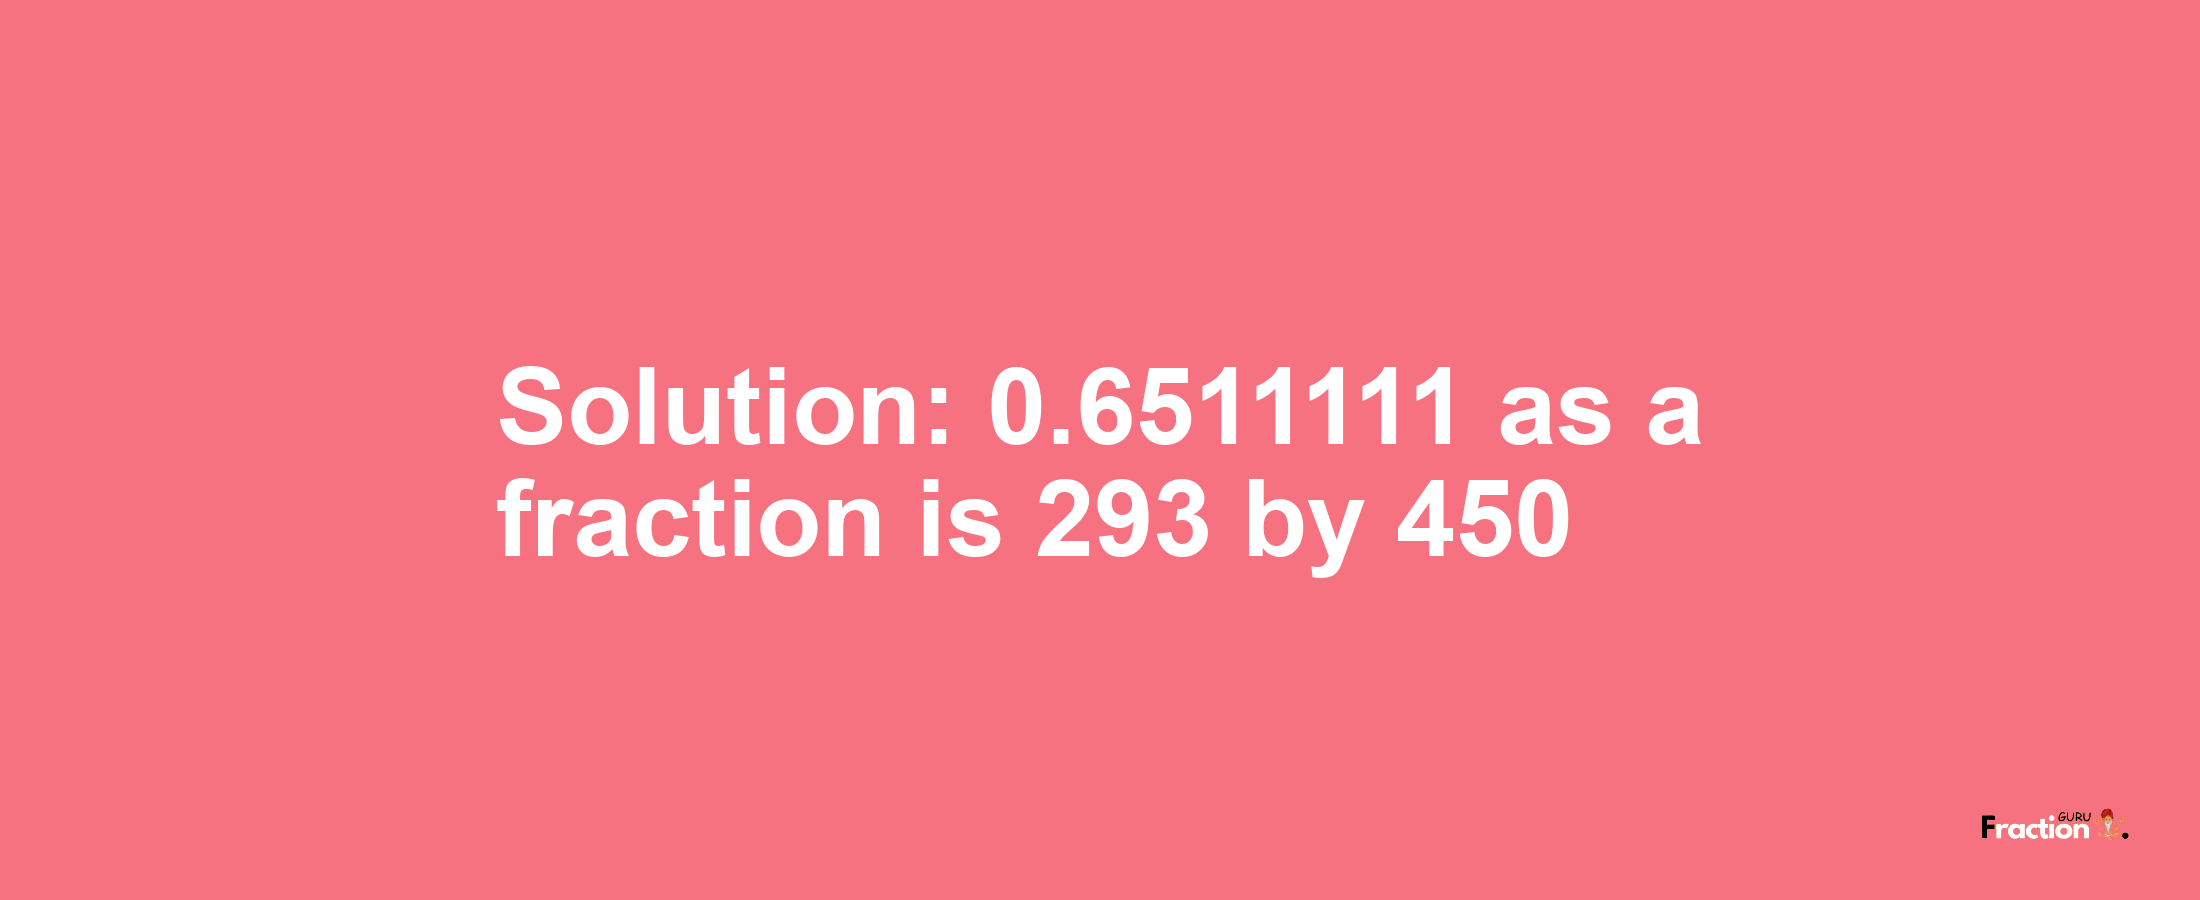 Solution:0.6511111 as a fraction is 293/450